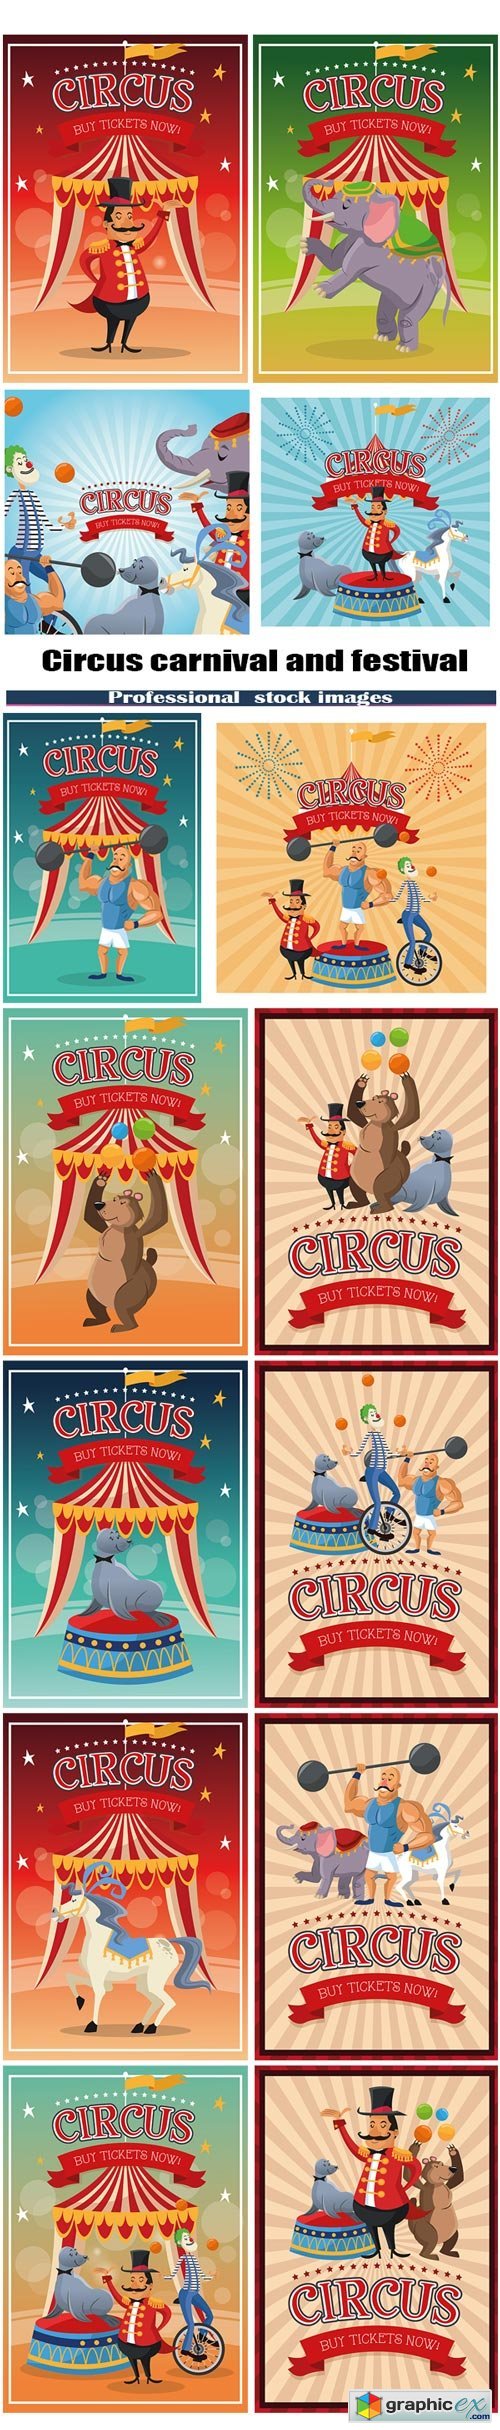 Circus carnival and festival